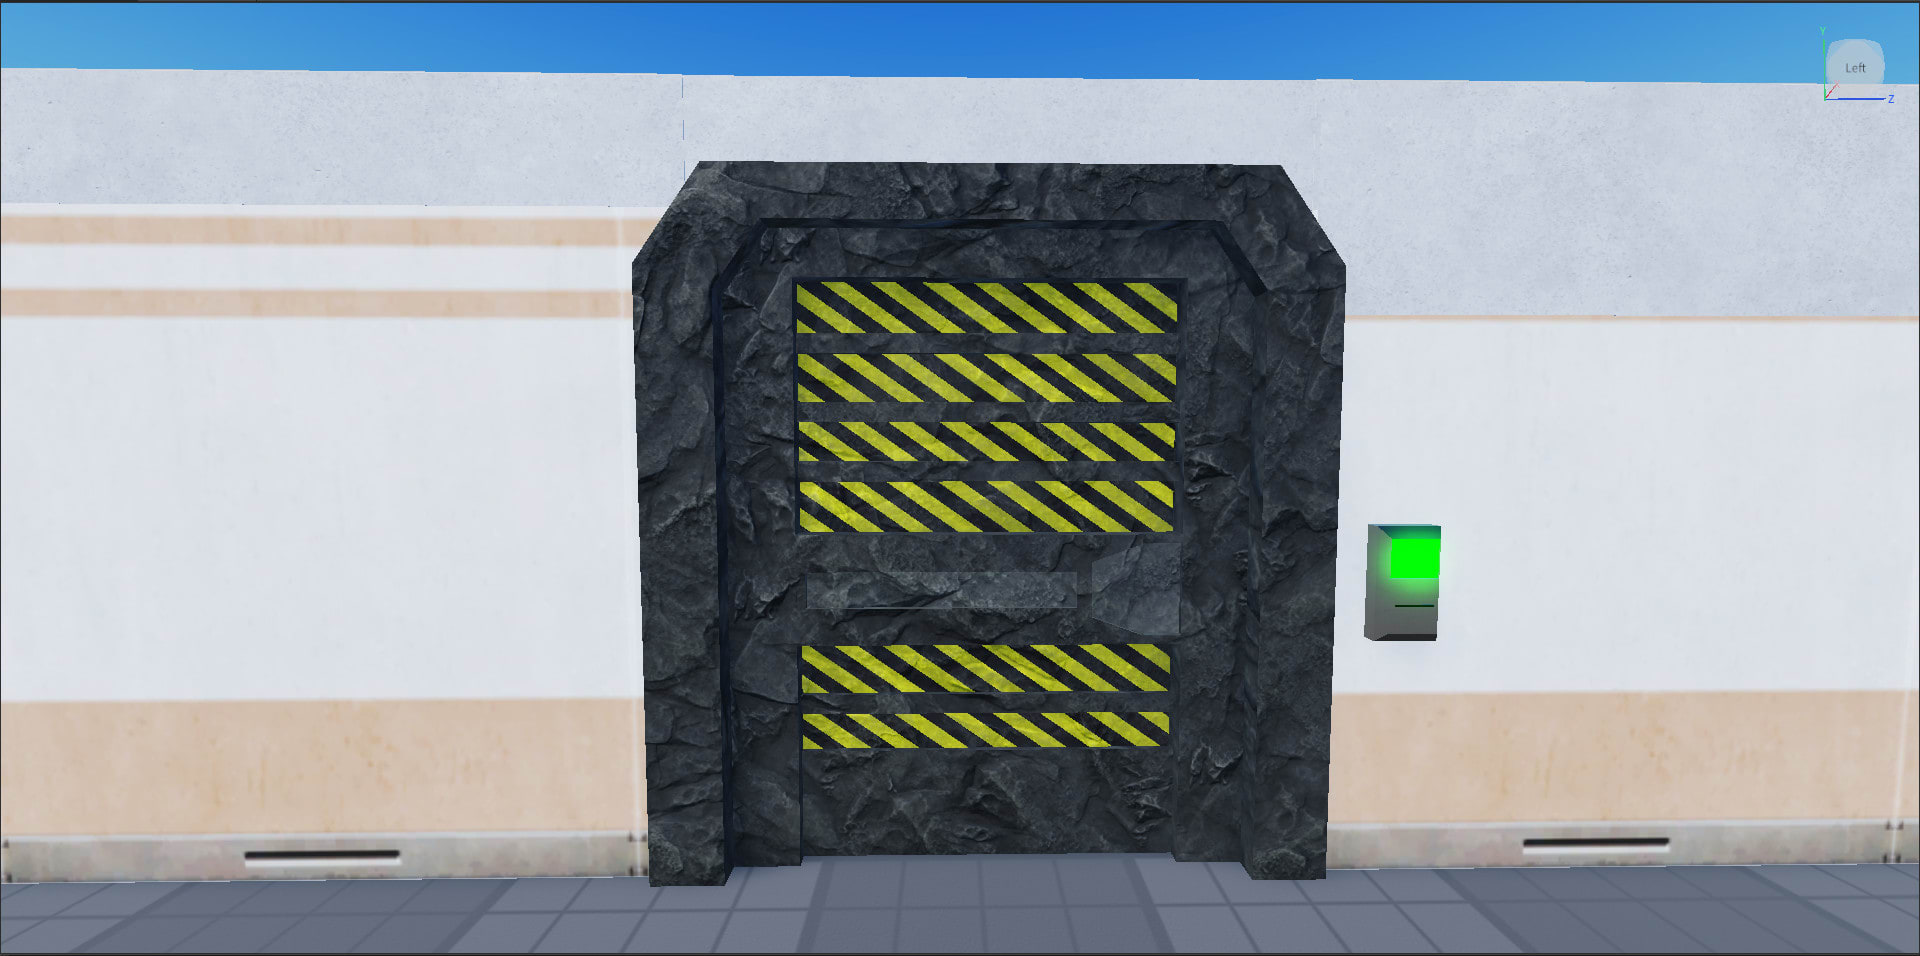 Build and script an scp door on roblox studio french or english by